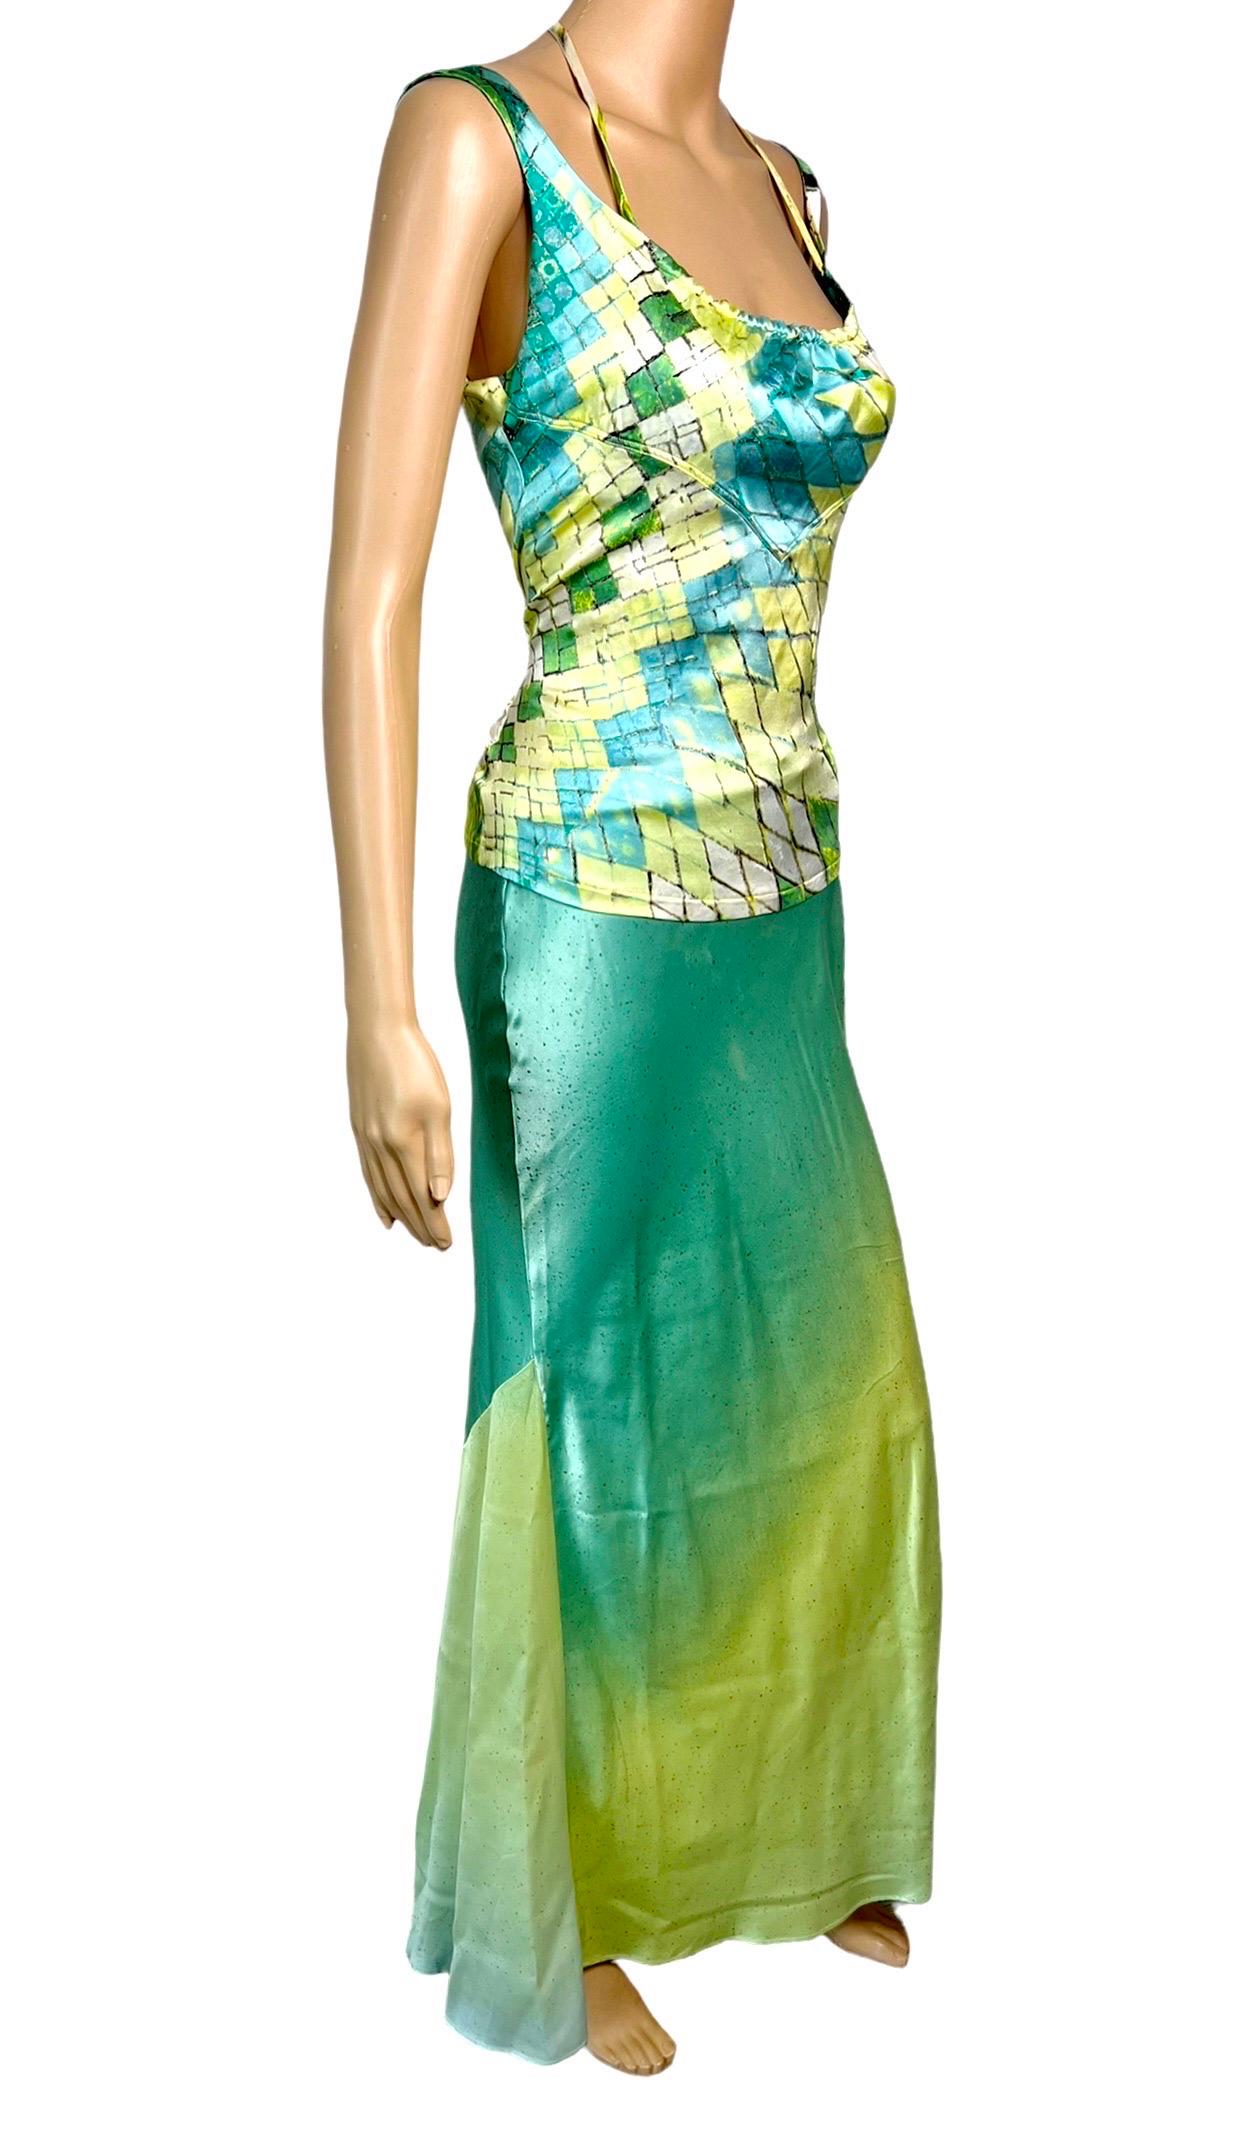 Women's Roberto Cavalli S/S 2004 Feather Embellished Halter Top & Maxi Skirt 2 Piece Set For Sale